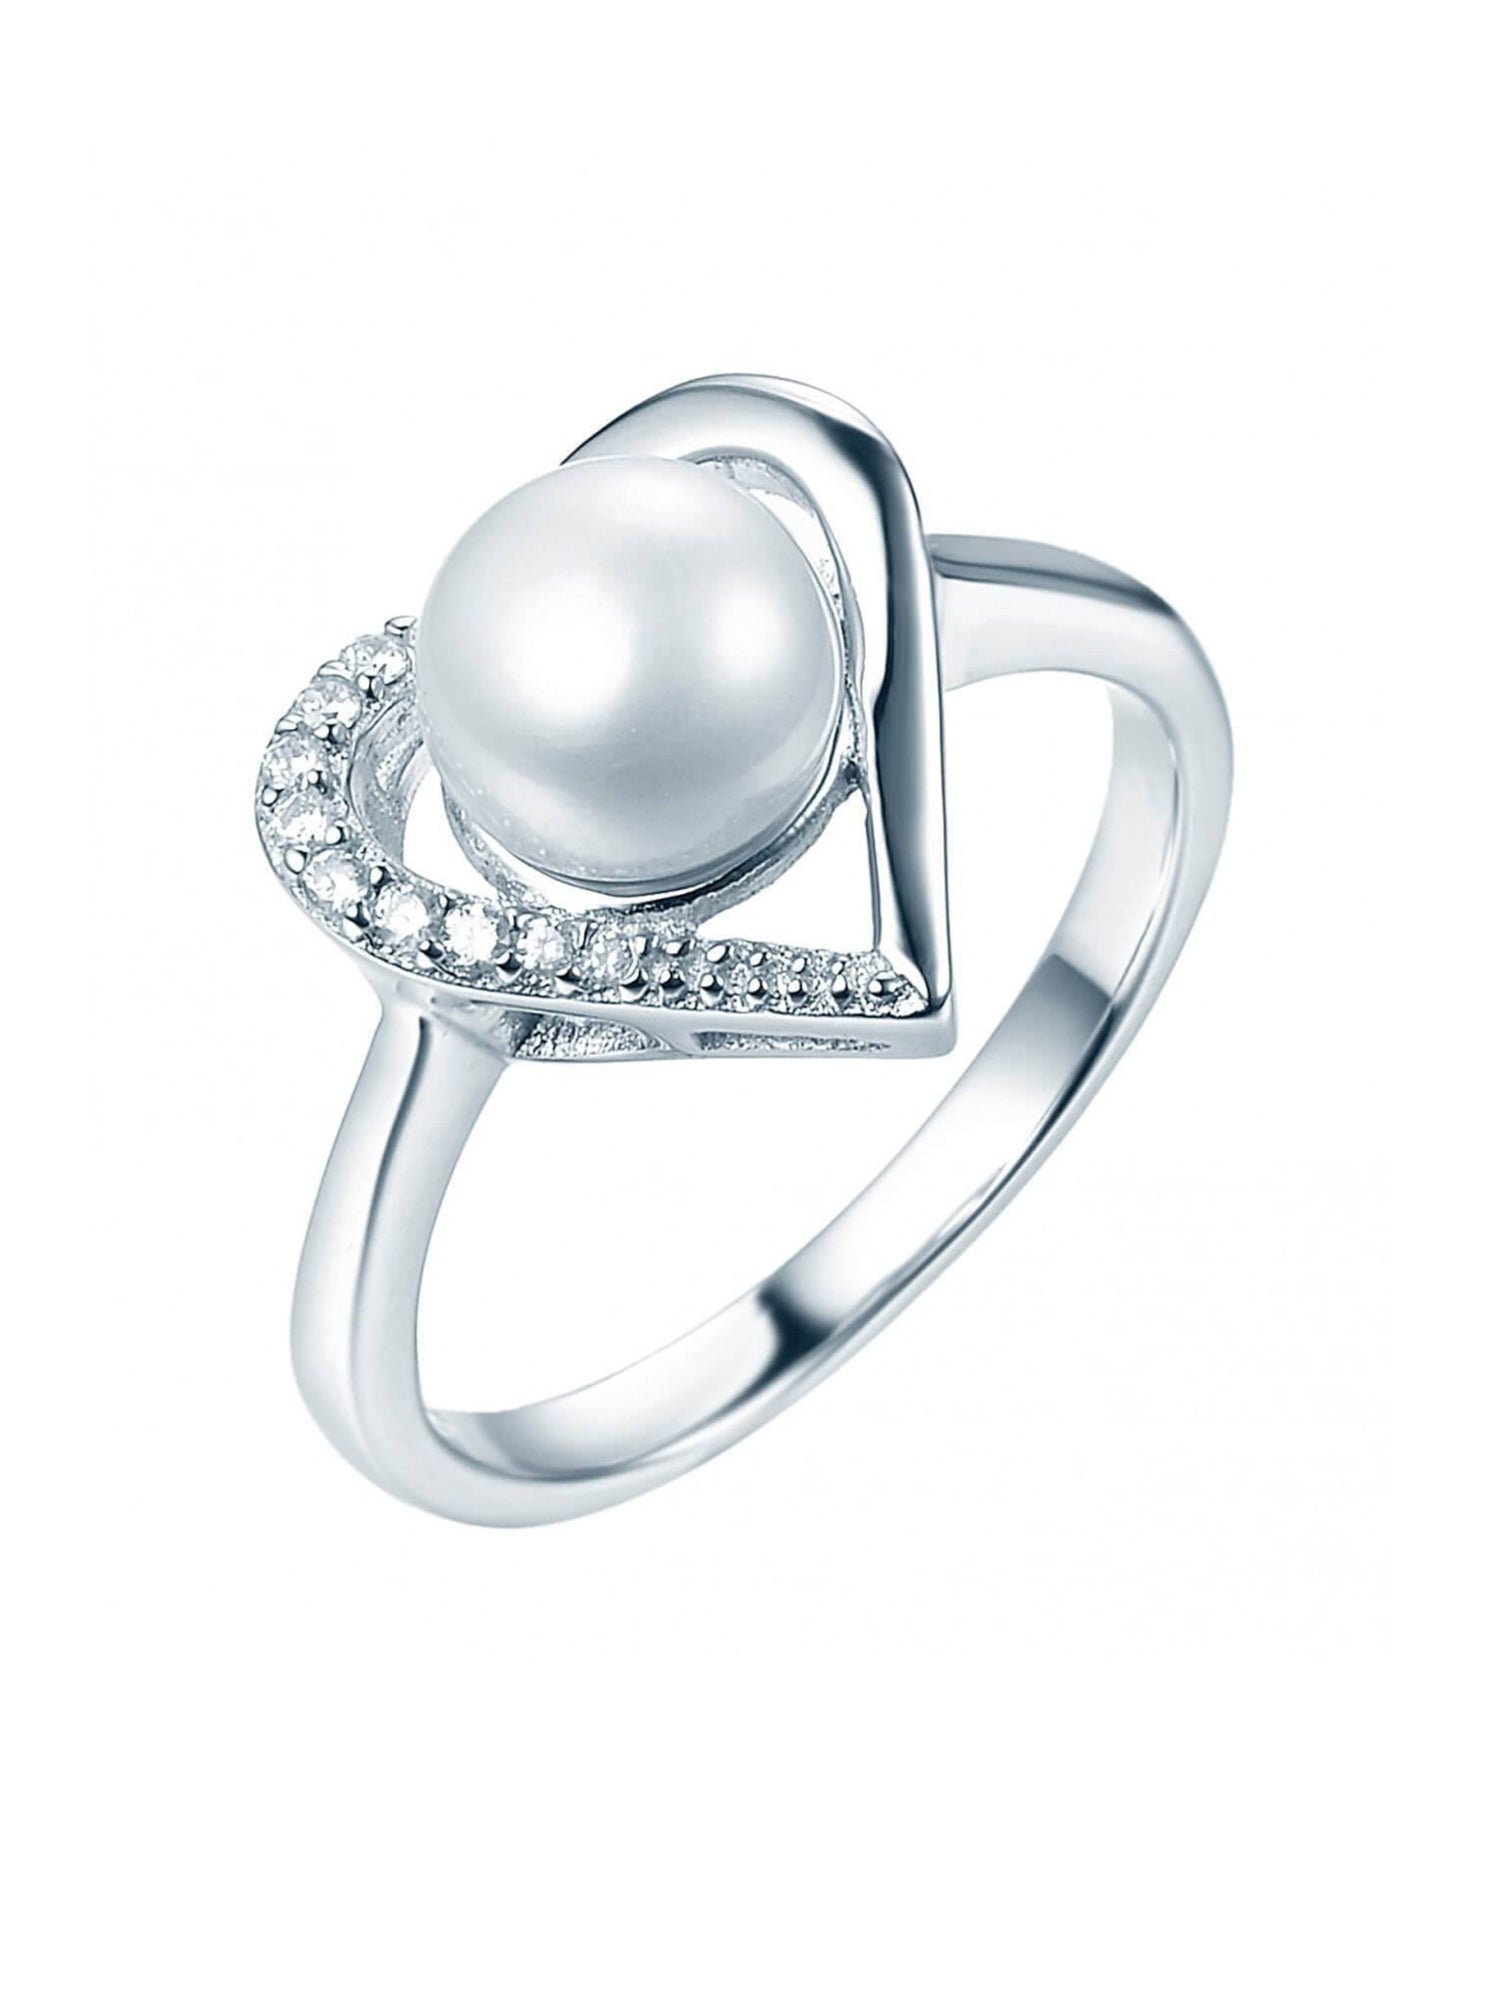 PEARL 925 SILVER HEART RING